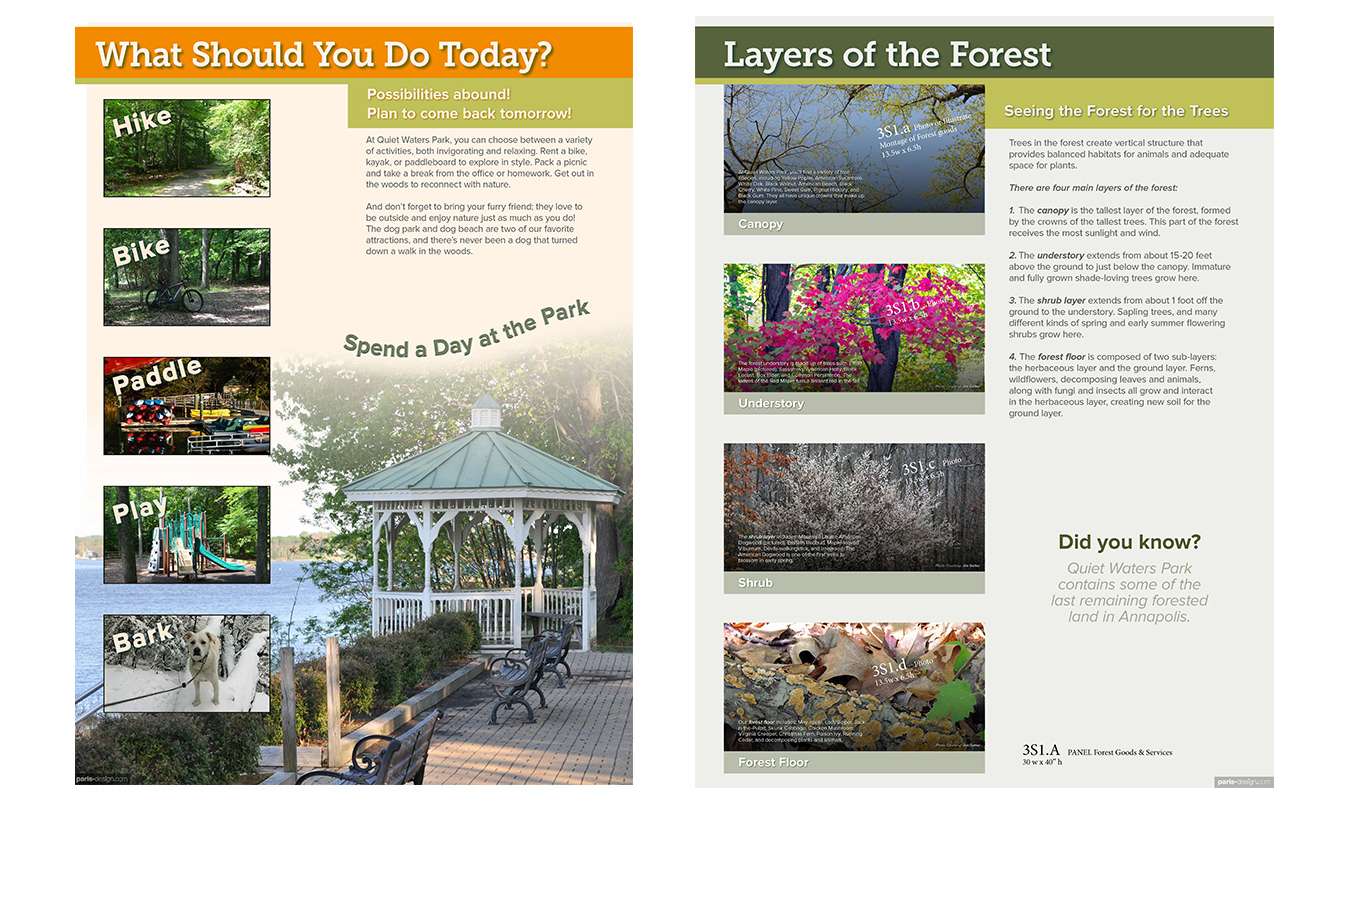 11a QWP 30x40 welc forst : Multiple images and limited text let visitors quickly get a sense of what to look for outside in the park.